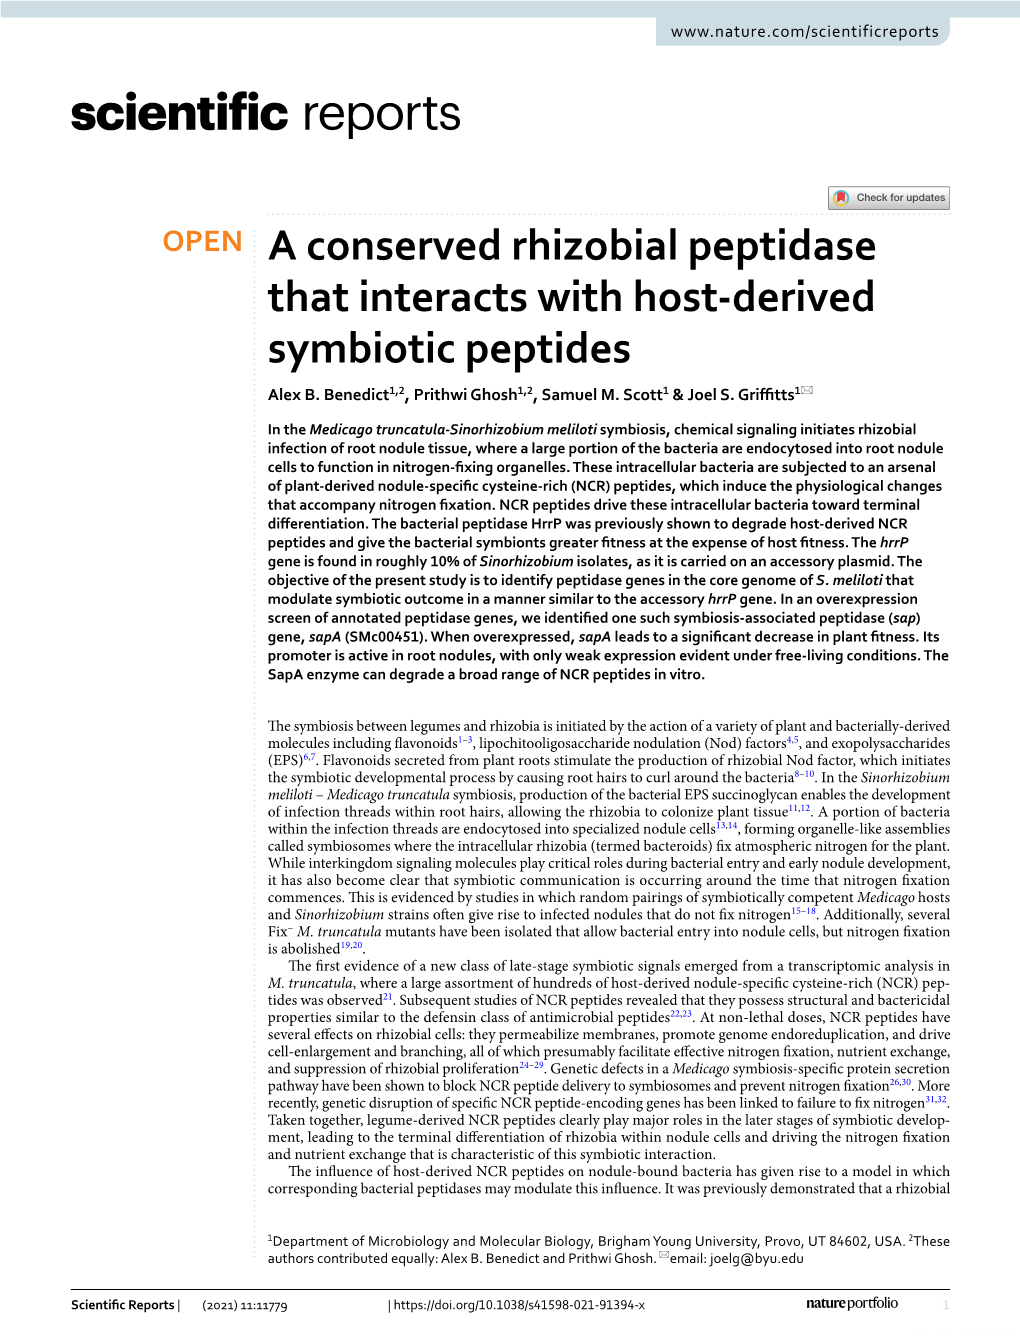 A Conserved Rhizobial Peptidase That Interacts with Host-Derived